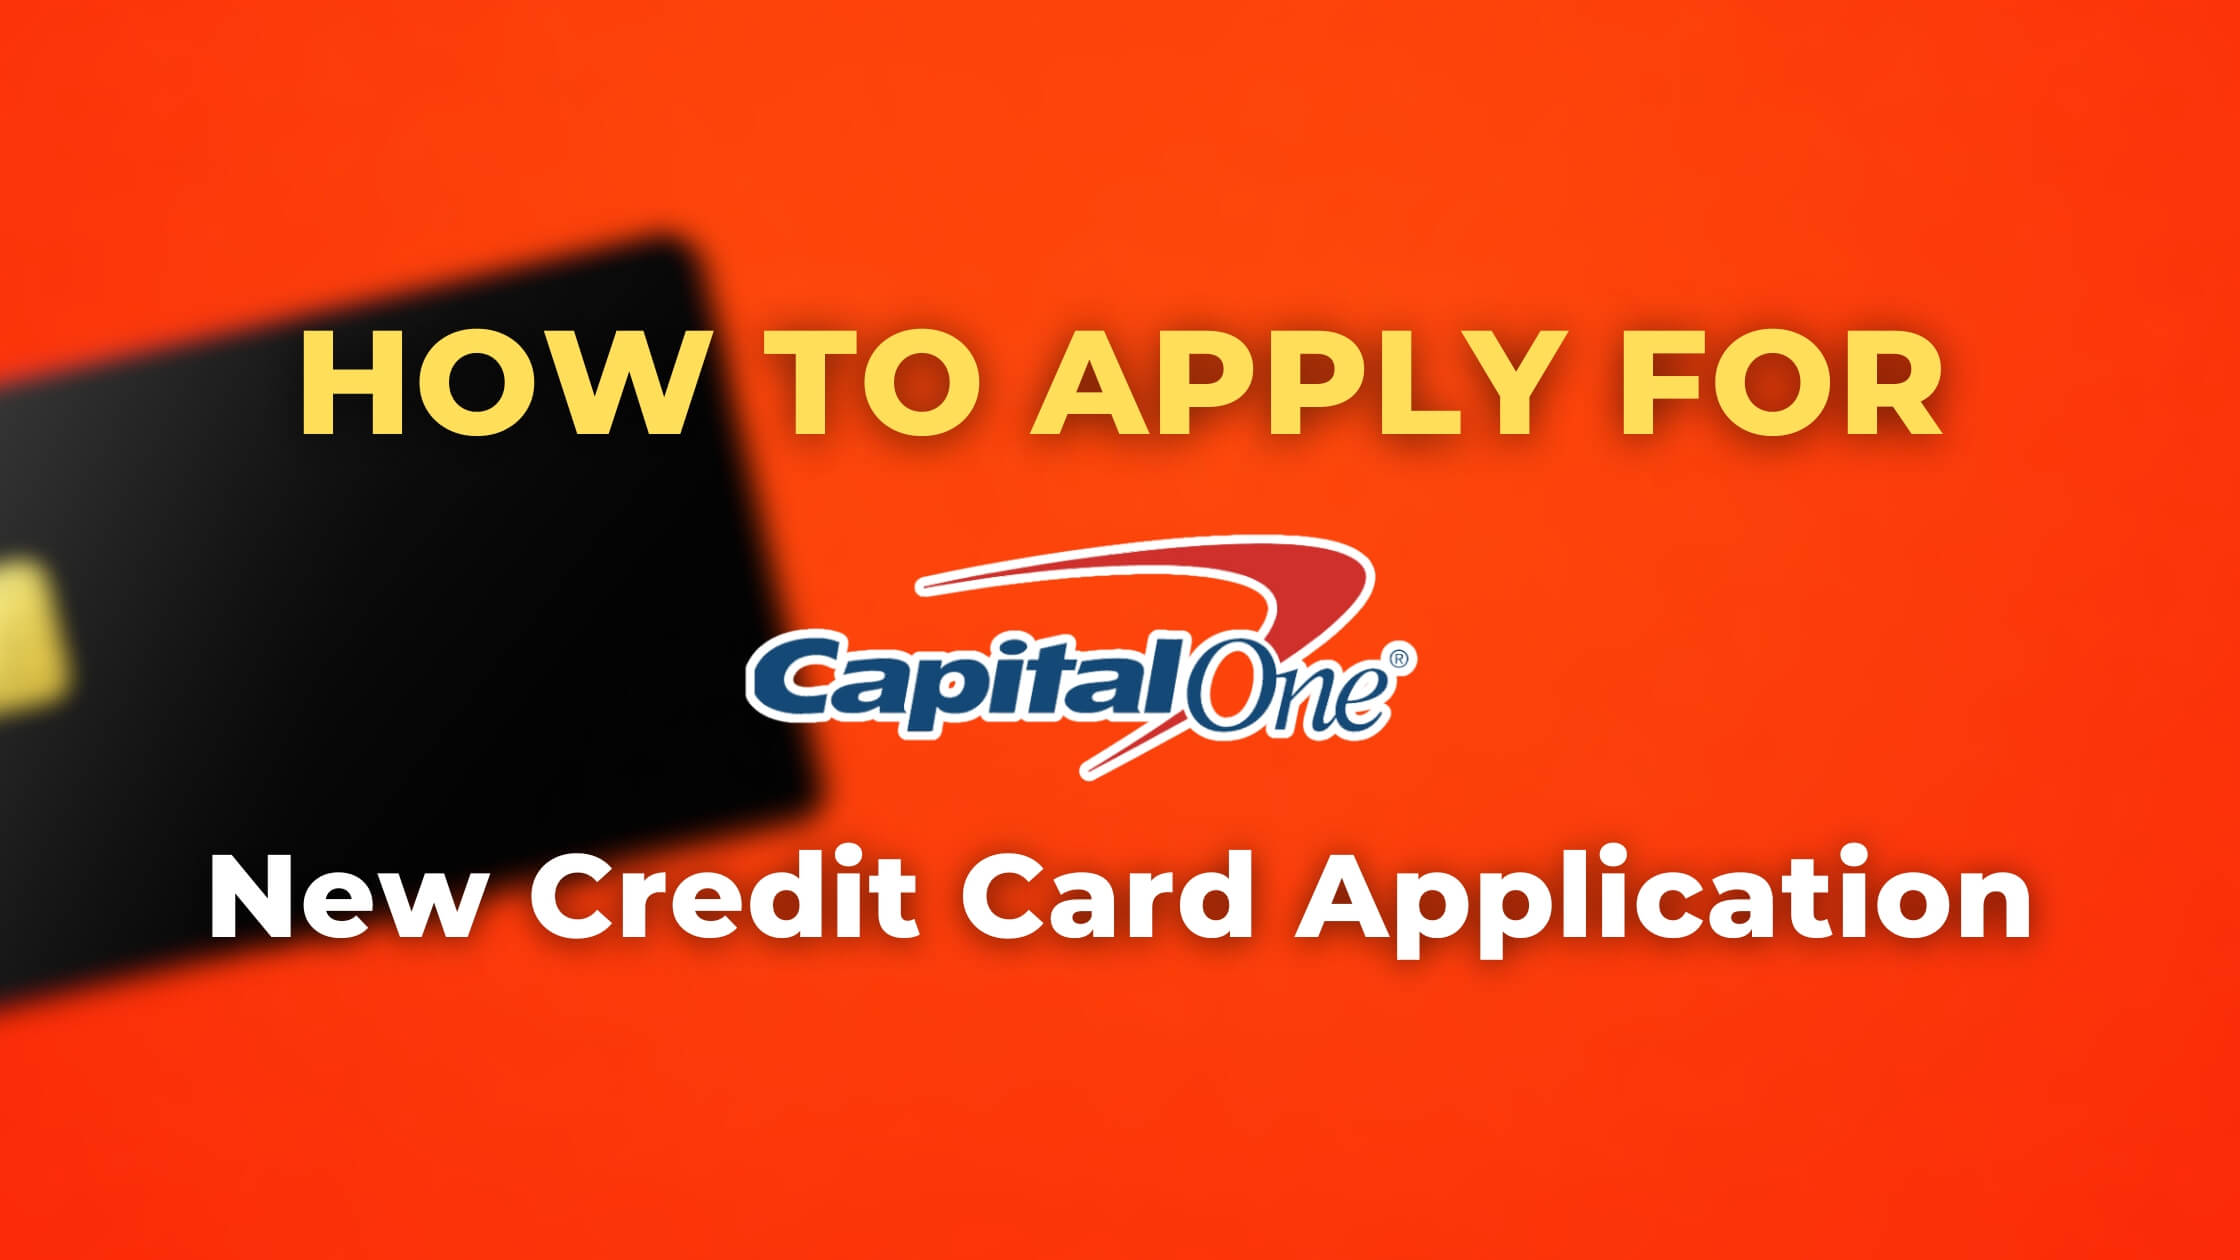 How to Apply for Capital One Credit Card